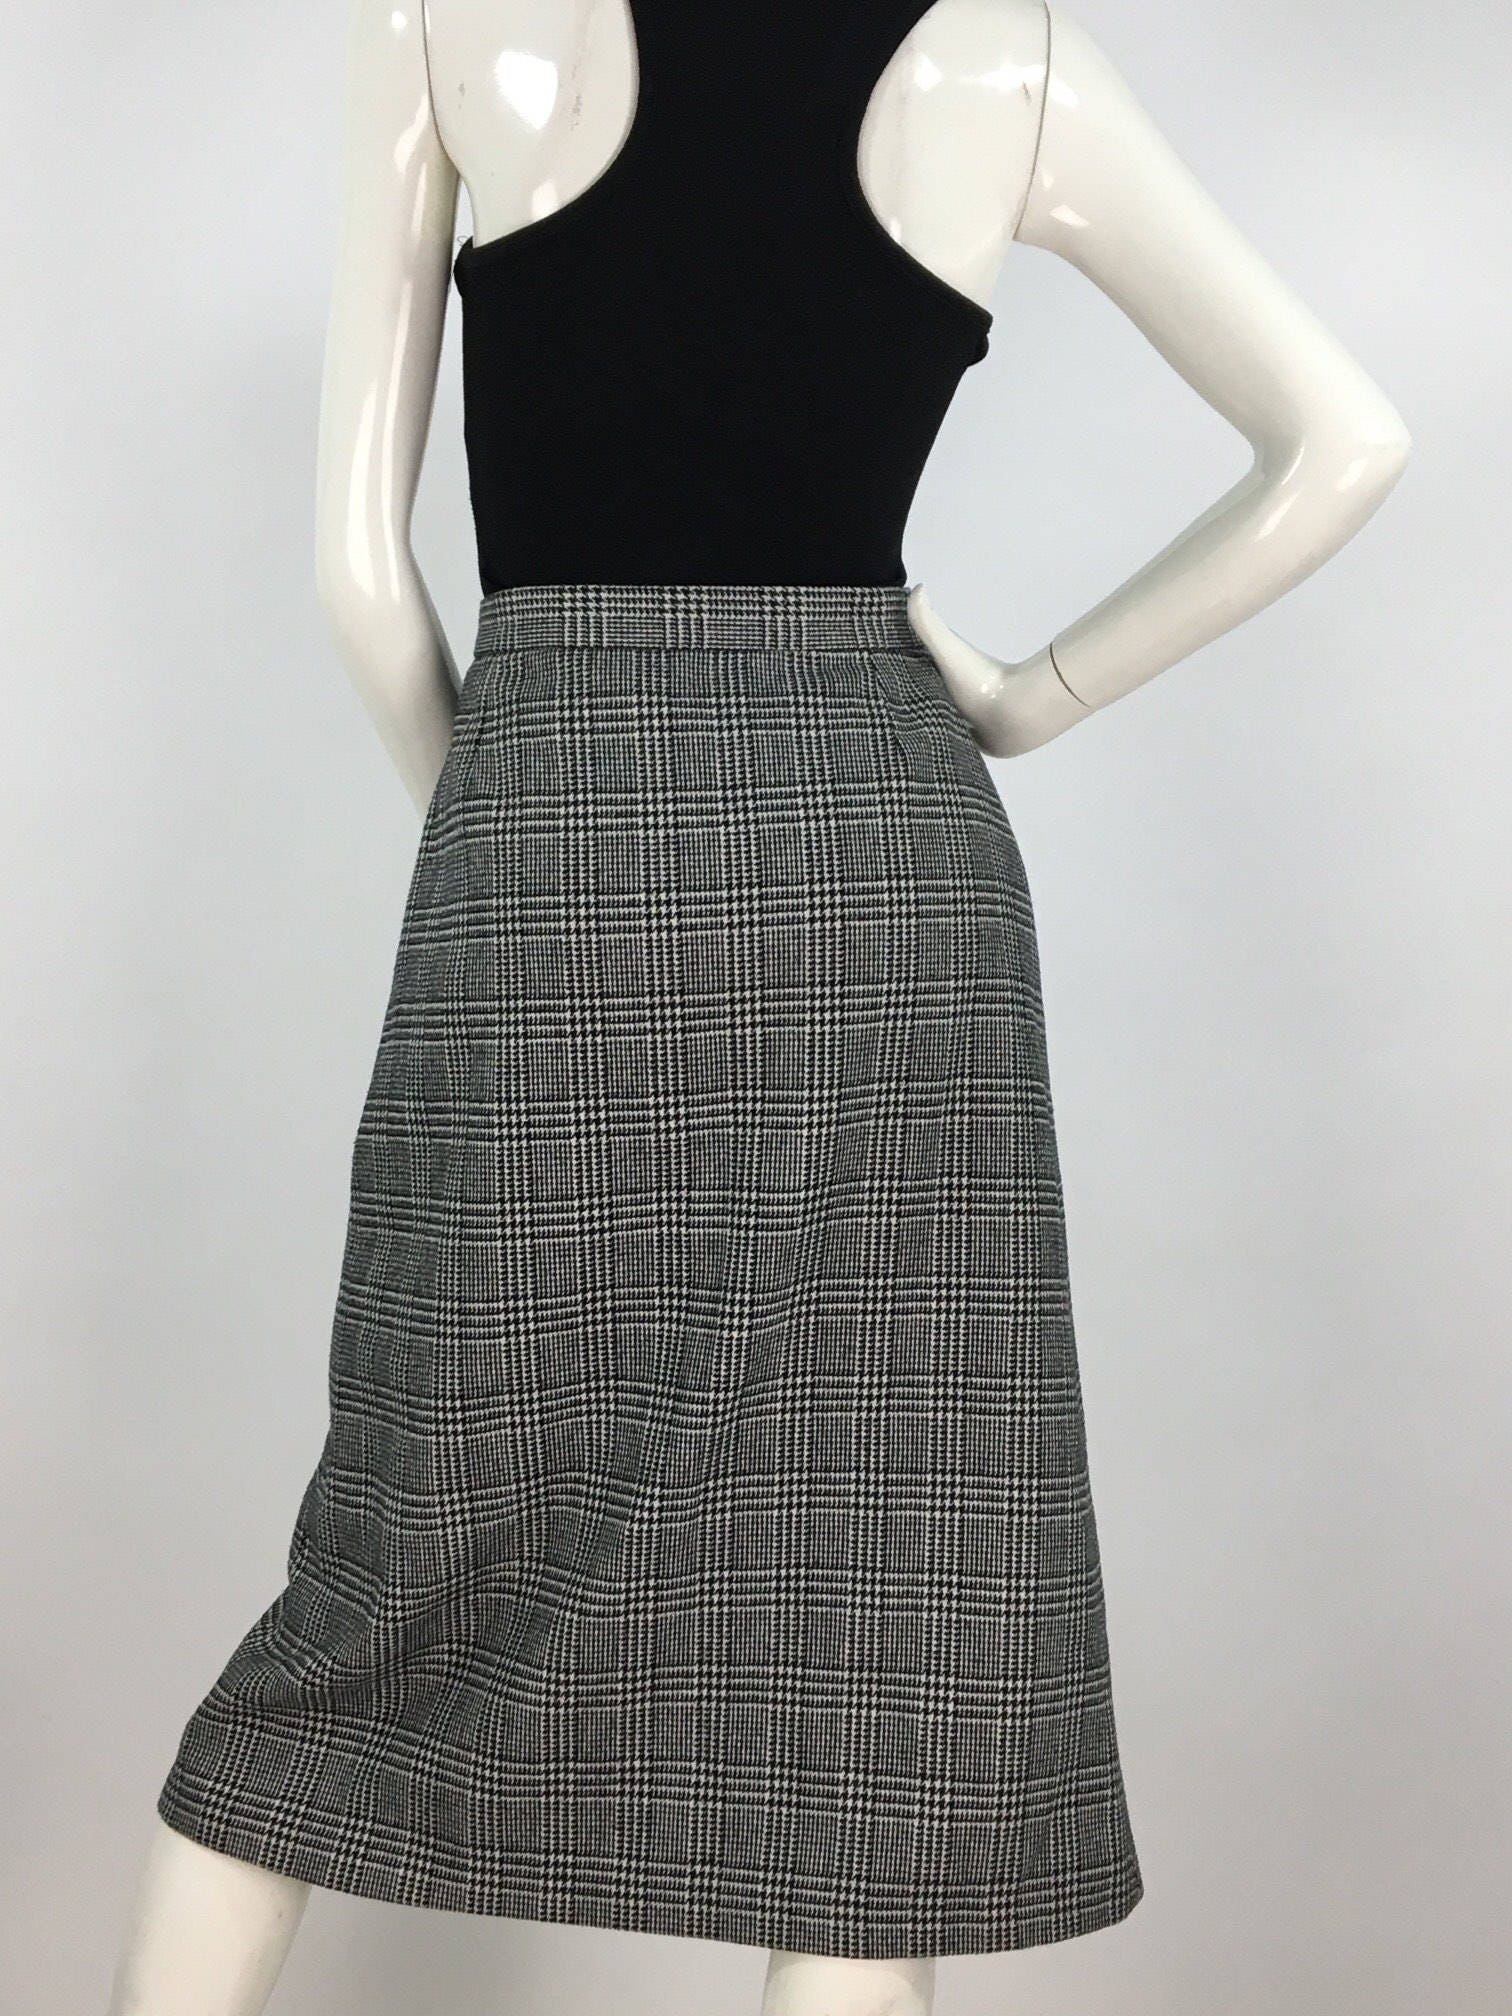 1970s Wool Plaid Button Front Skirt - Etsy